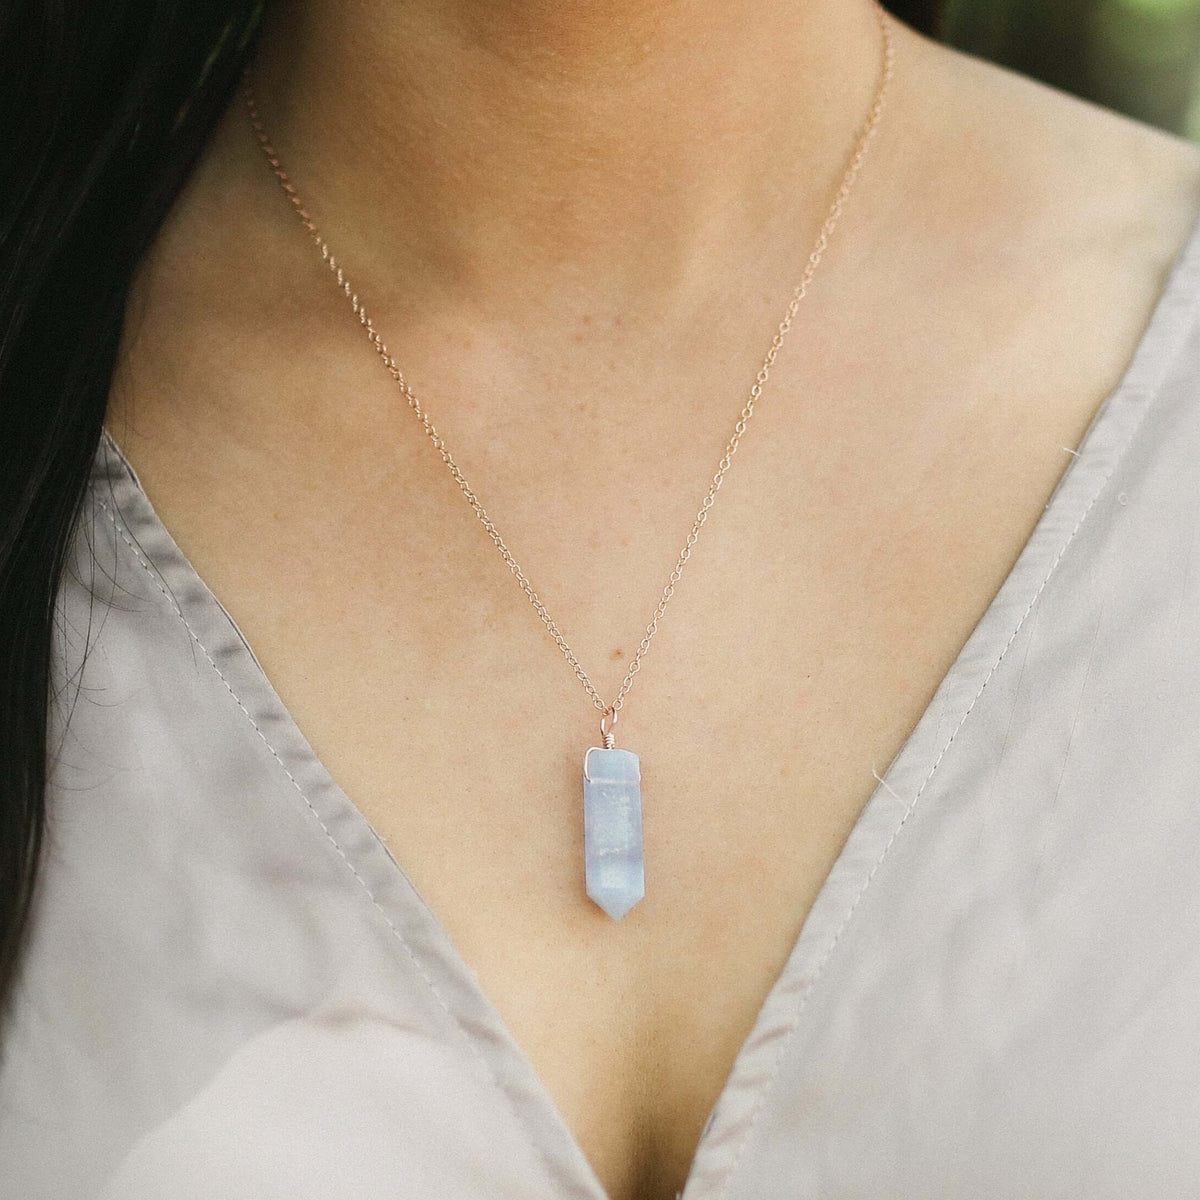 Large Crystal Point Necklace - Blue Lace Agate - 14K Rose Gold Fill - Luna Tide Handmade Jewellery